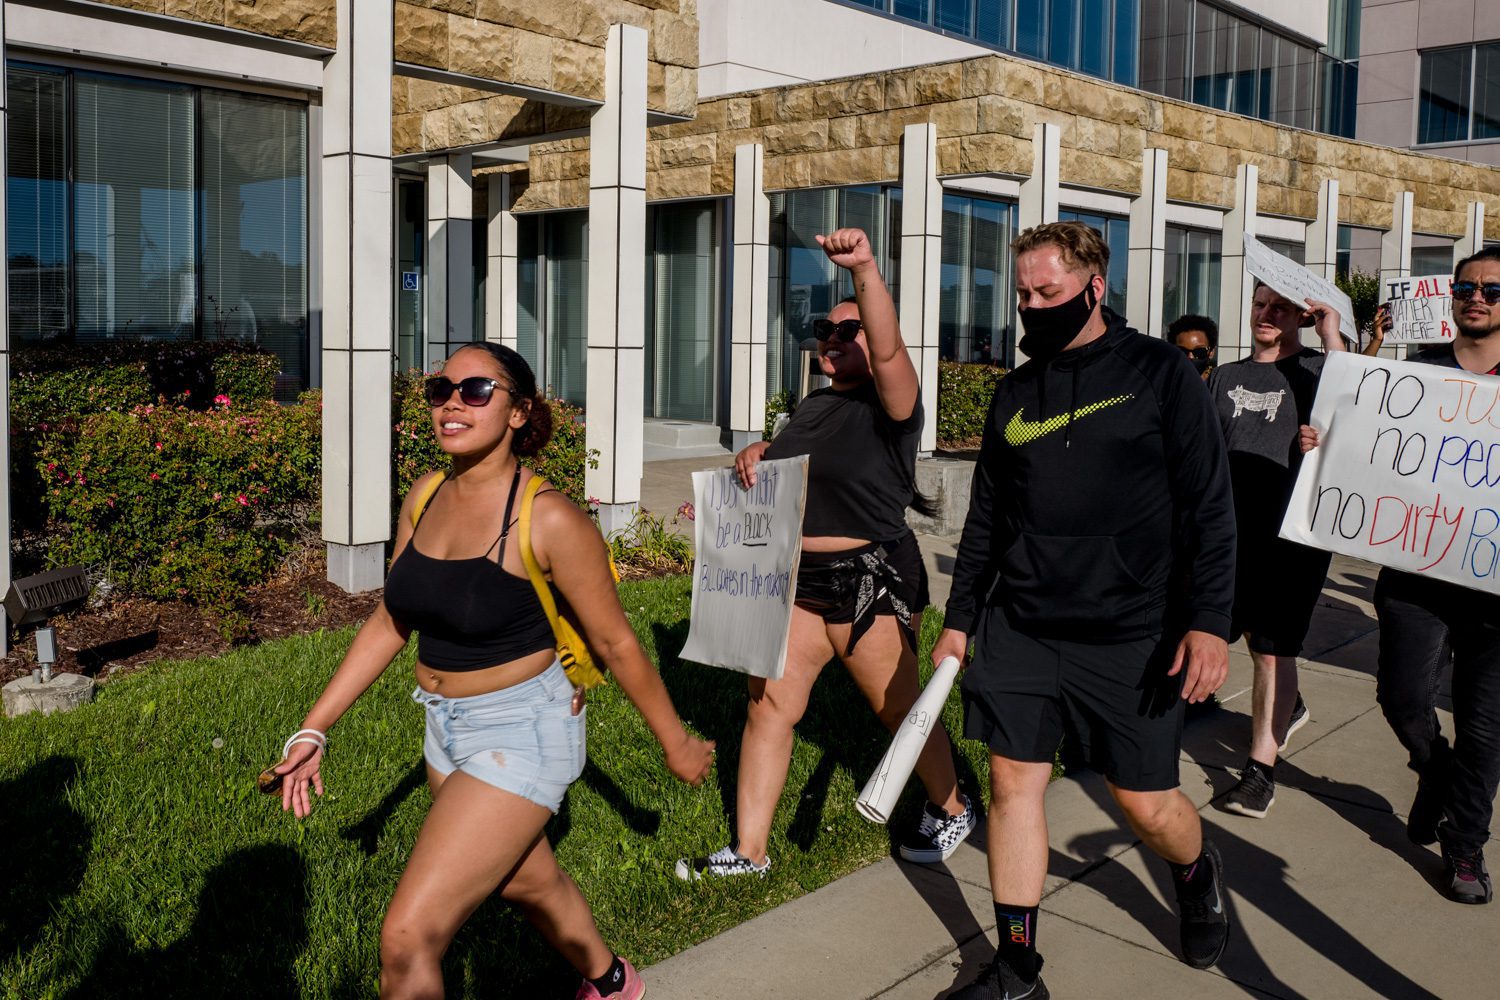 Young people, one with her first in the air, march past the police station at 400 Mare Island Way in Vallejo, Calif.